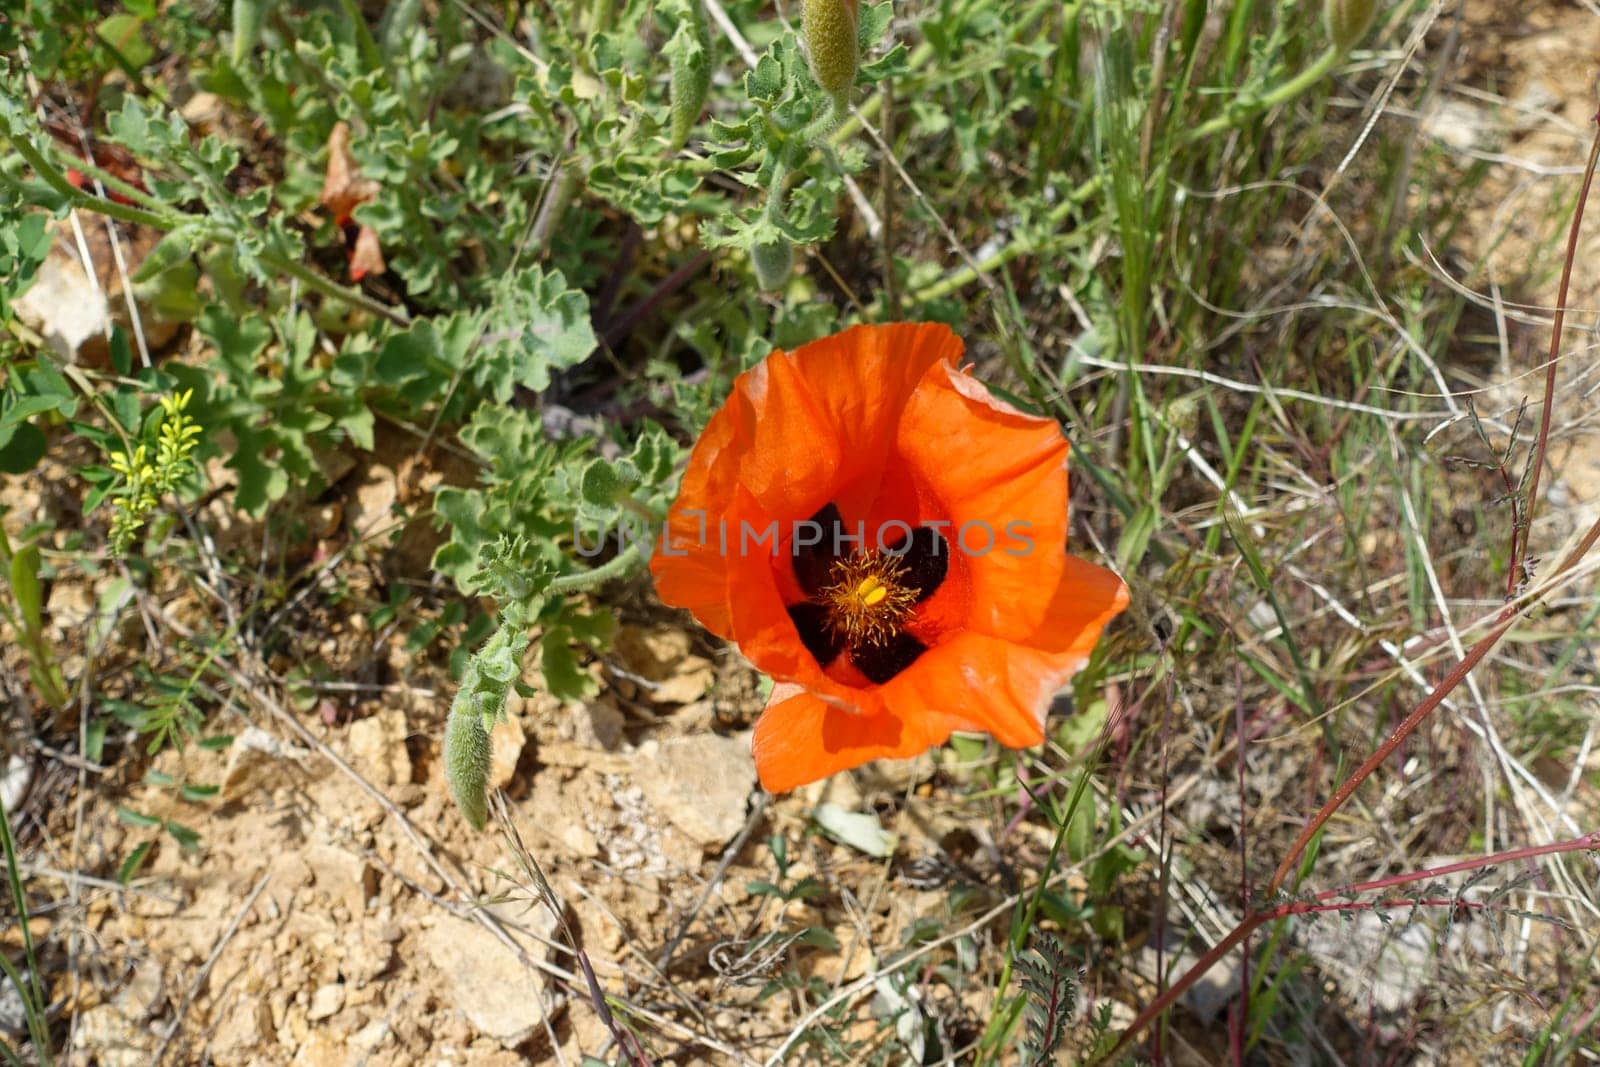 The newly blooming poppy flower in nature, a person touches the poppy flower, by nhatipoglu